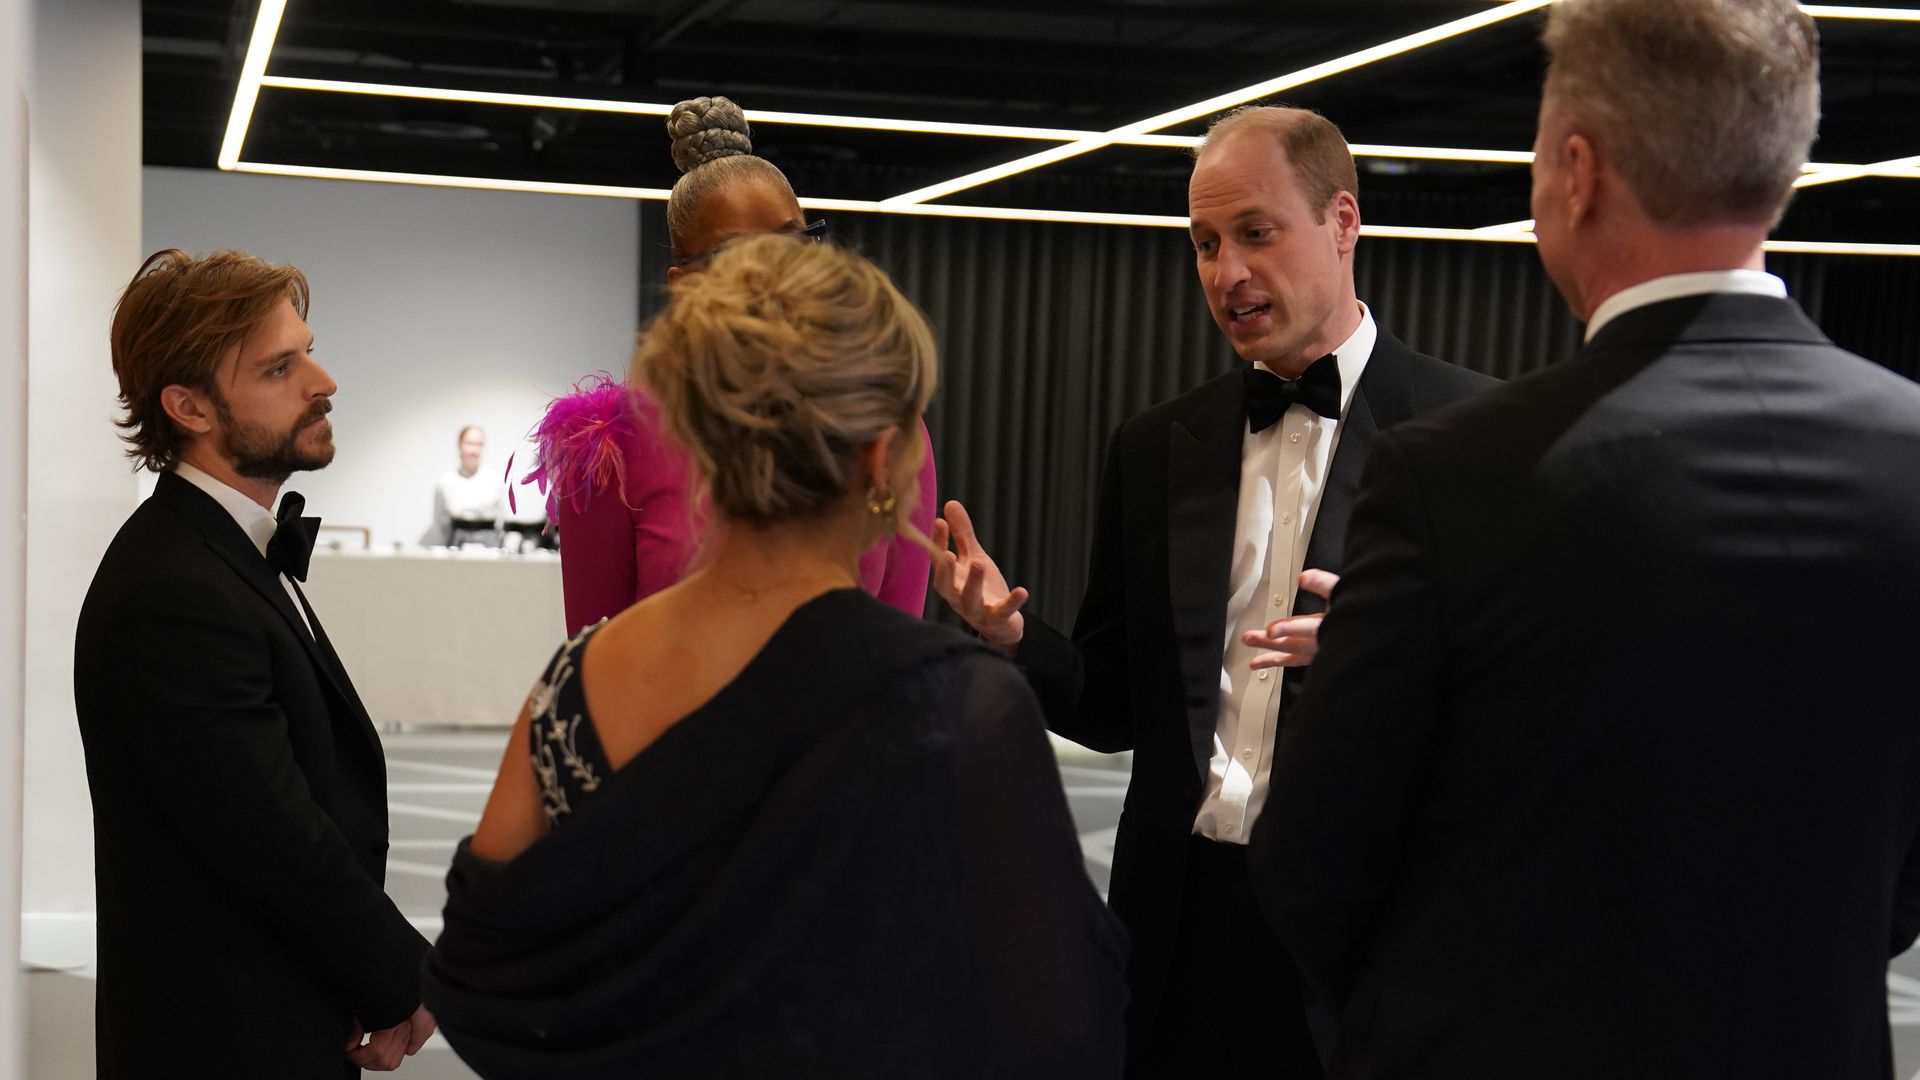 Prince William speaking with people